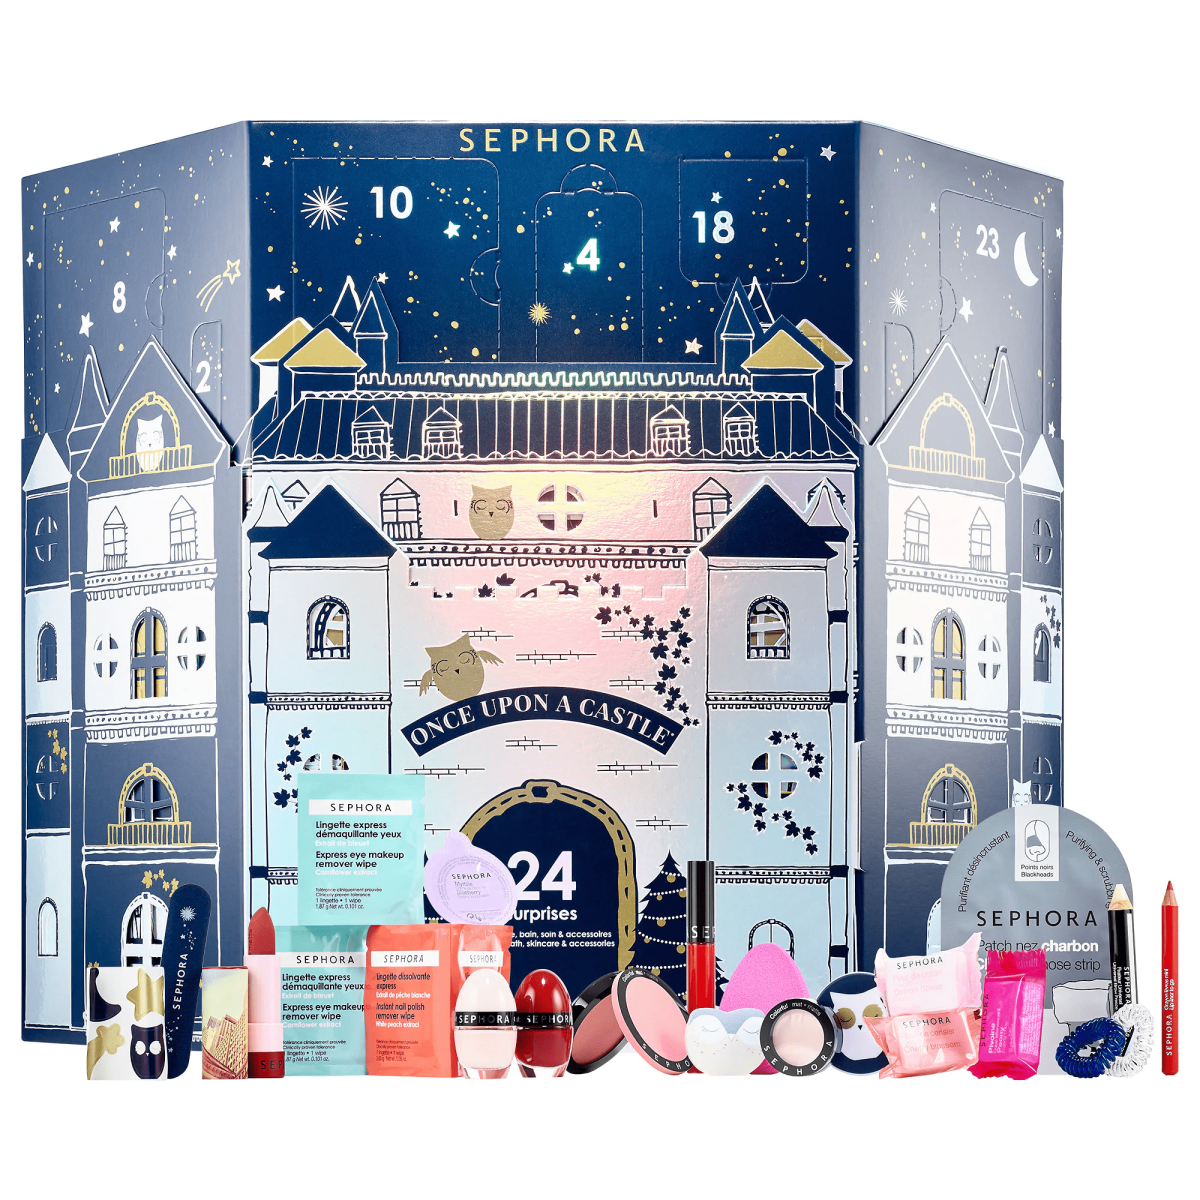 2018 Sephora Advent Calendar Available Now + Coupons Hello Subscription